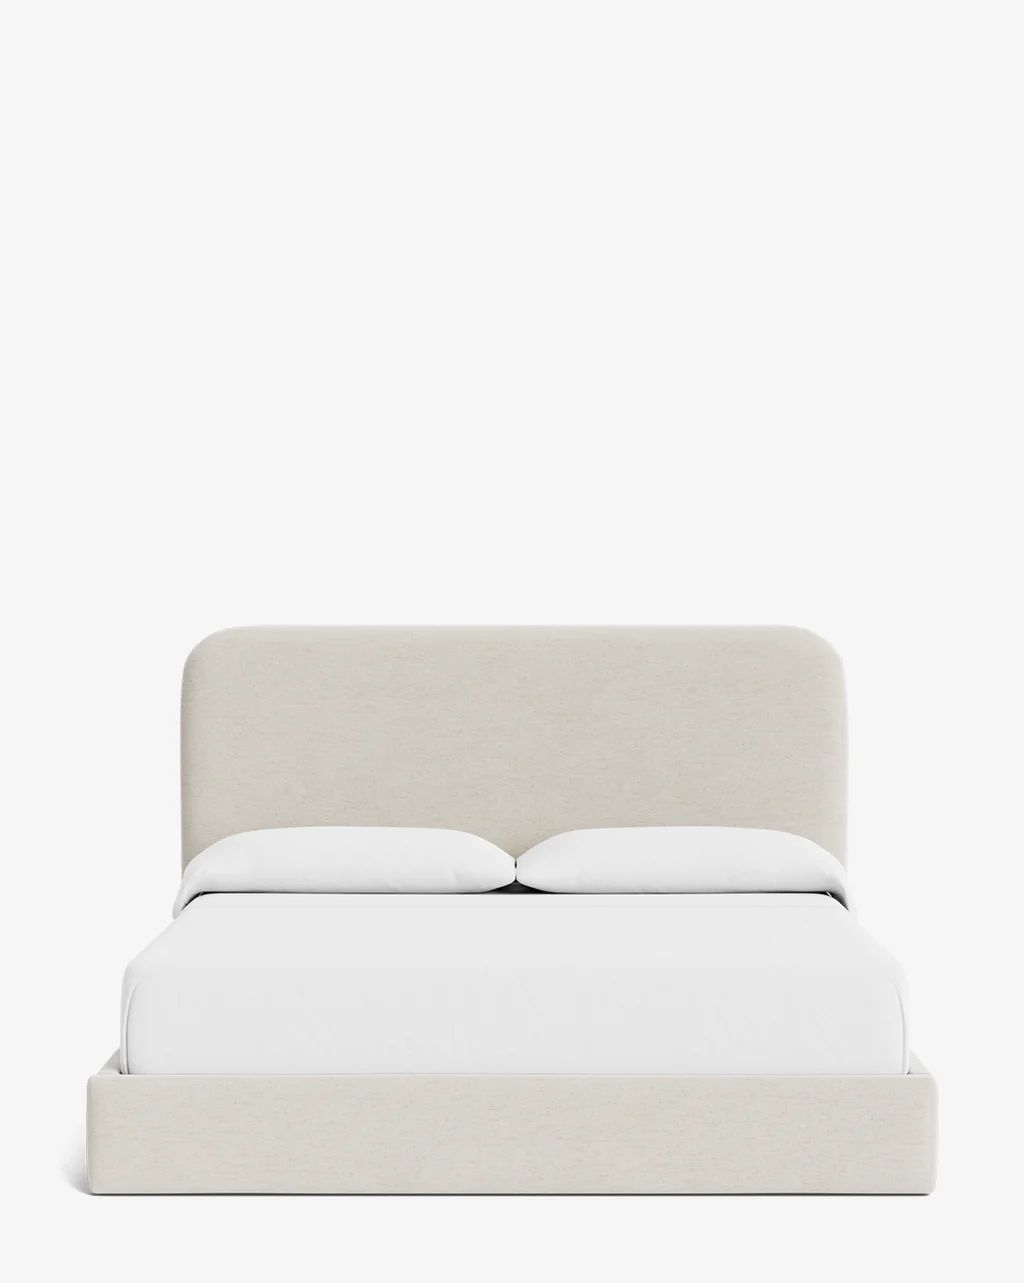 Northcott Bed | McGee & Co.